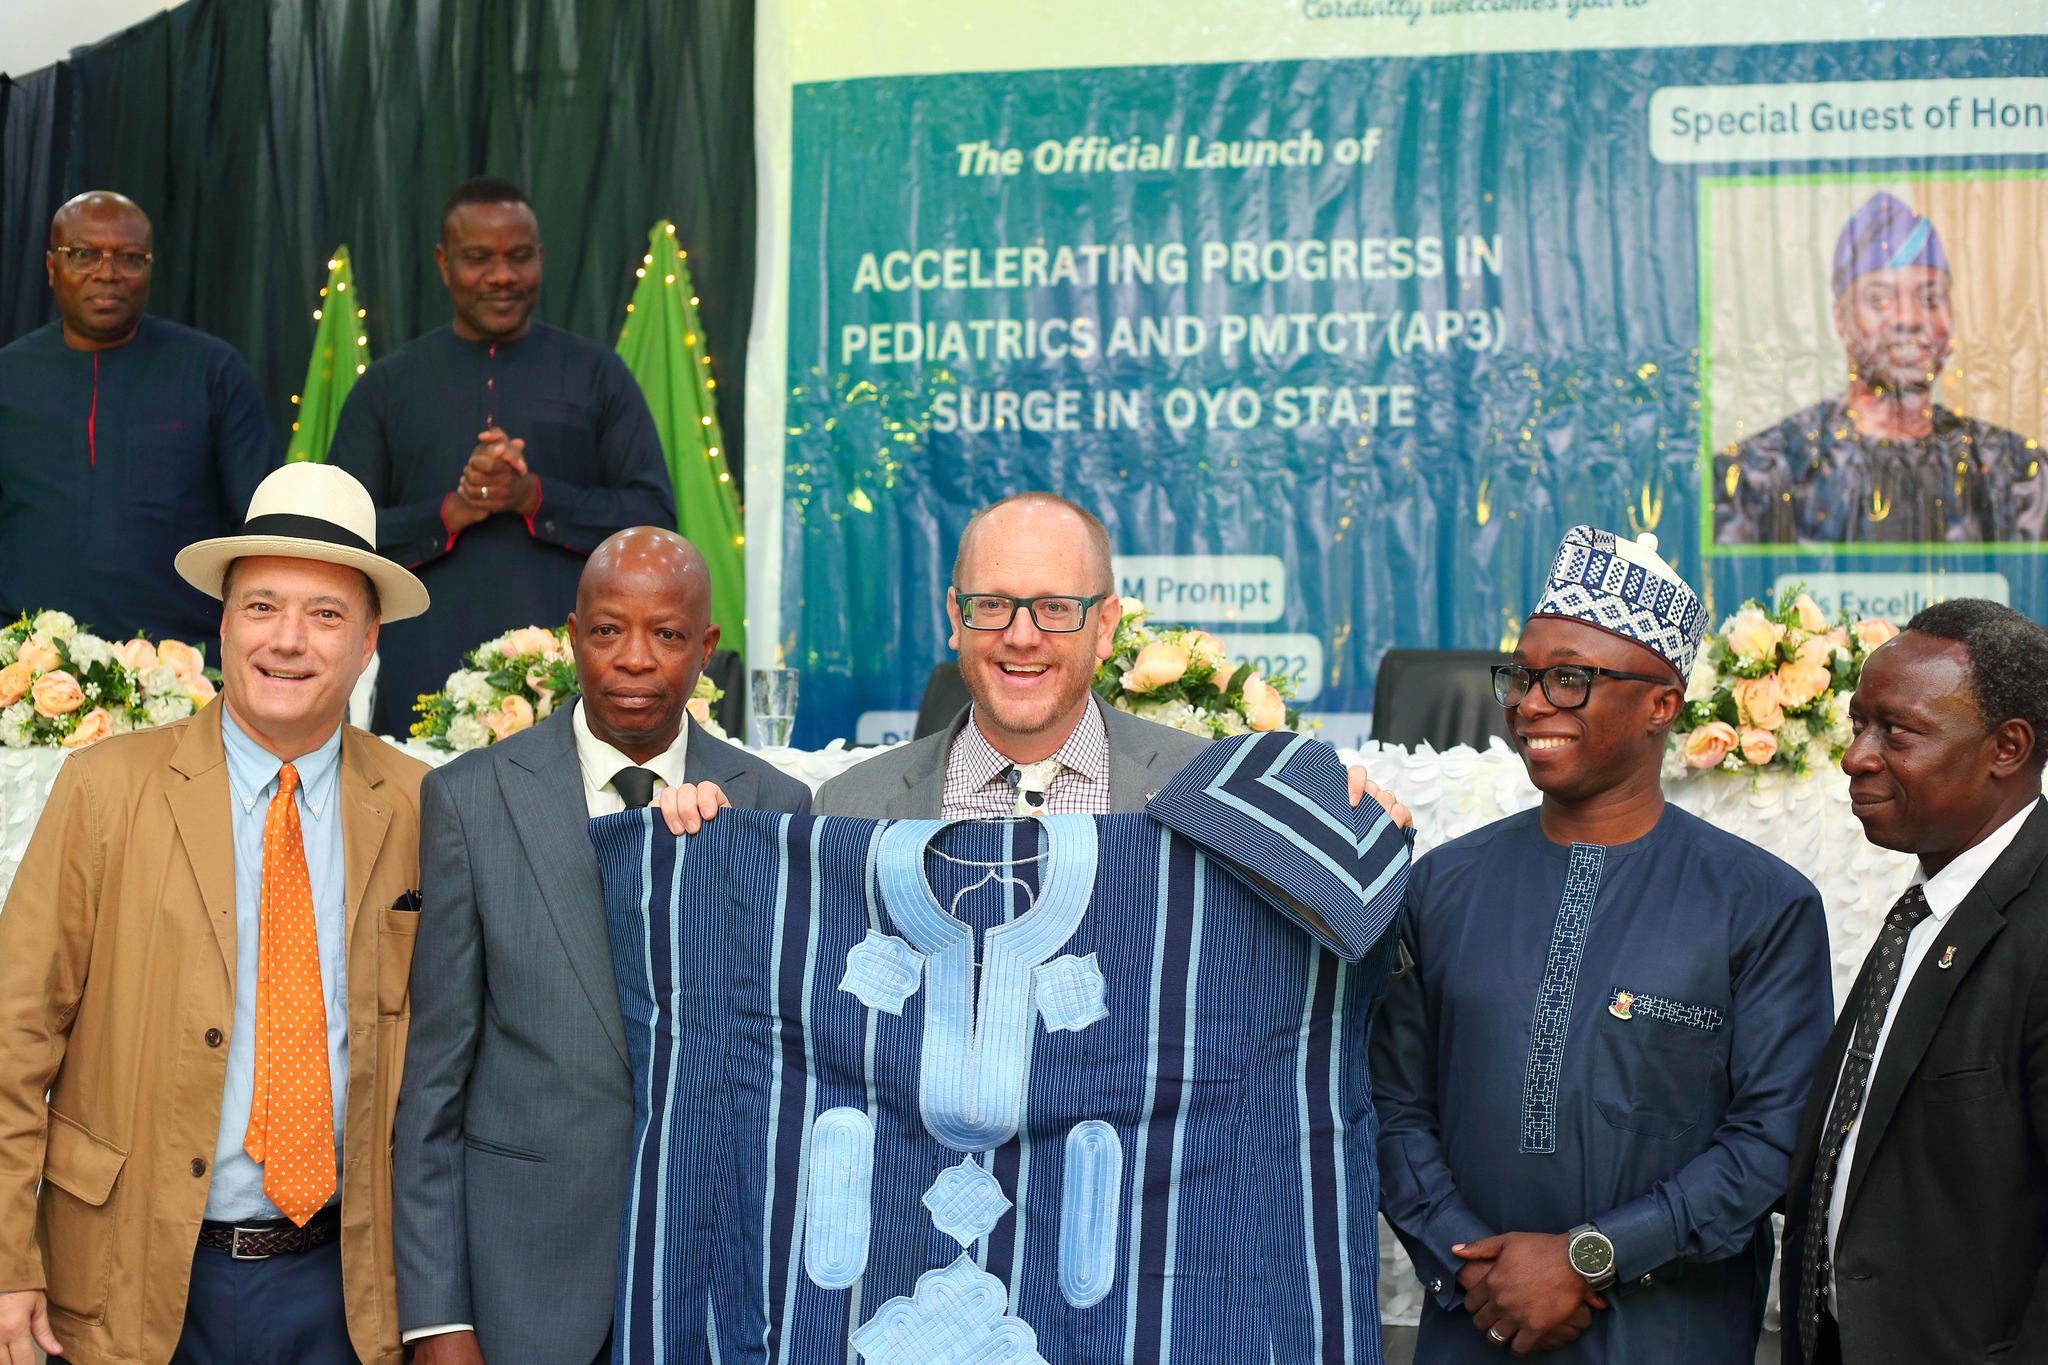 Oyo State government with support from APIN Public Health Initiatives and the U.S Centers for Disease Control and Prevention (CDC) launched the Accelerating Progress in Pediatrics and PMTCT (AP3) Surge.